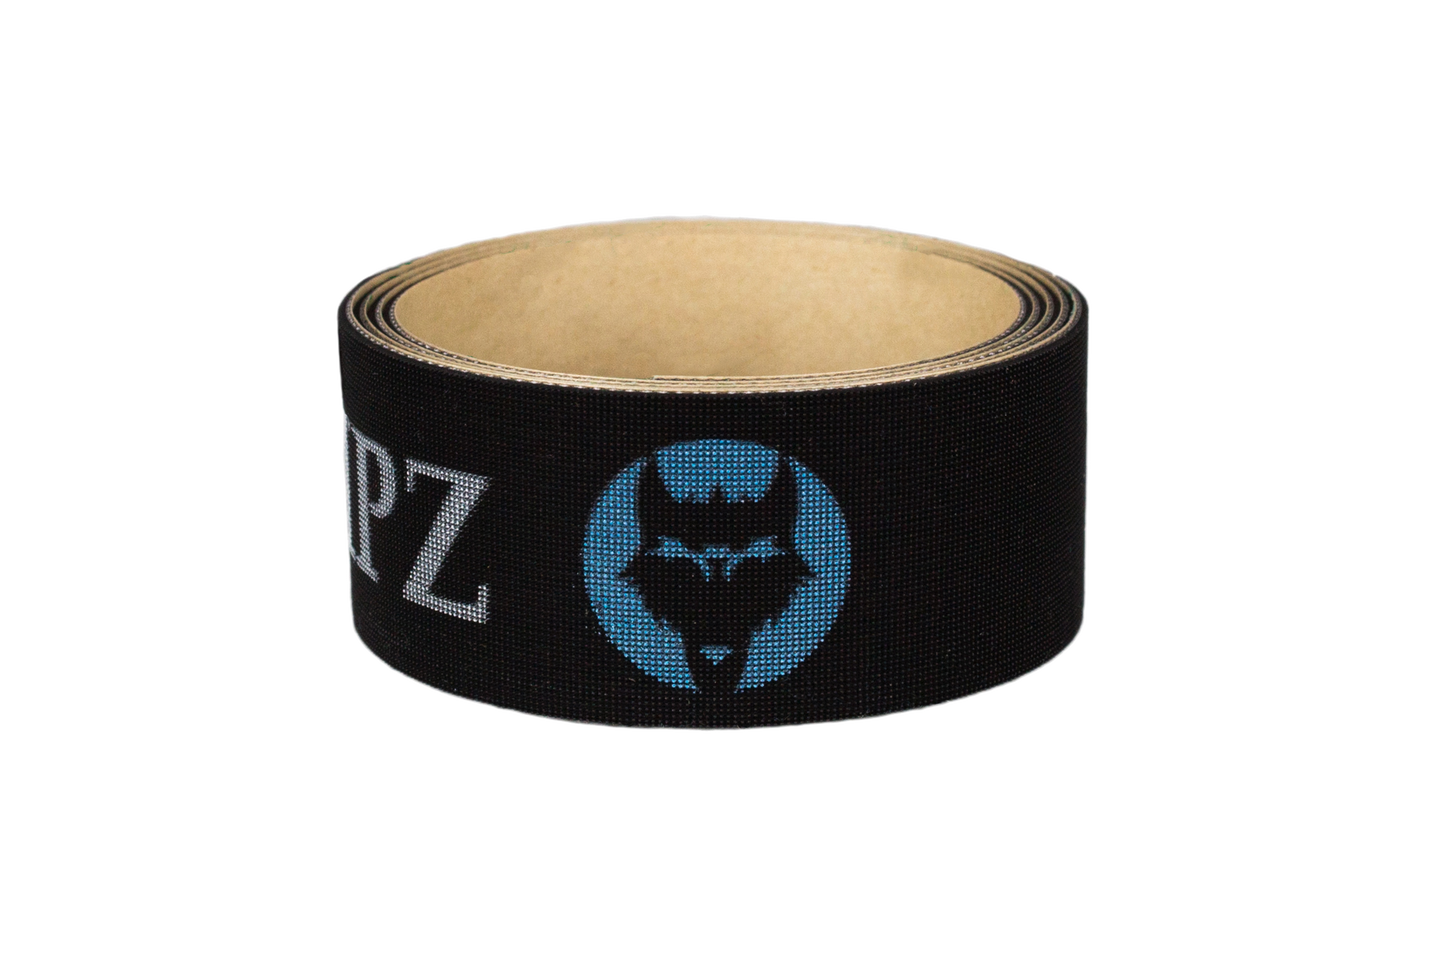 VukGripz Lacrosse Tape with Blue and White logos is American Made, Thin, and Durable on roll